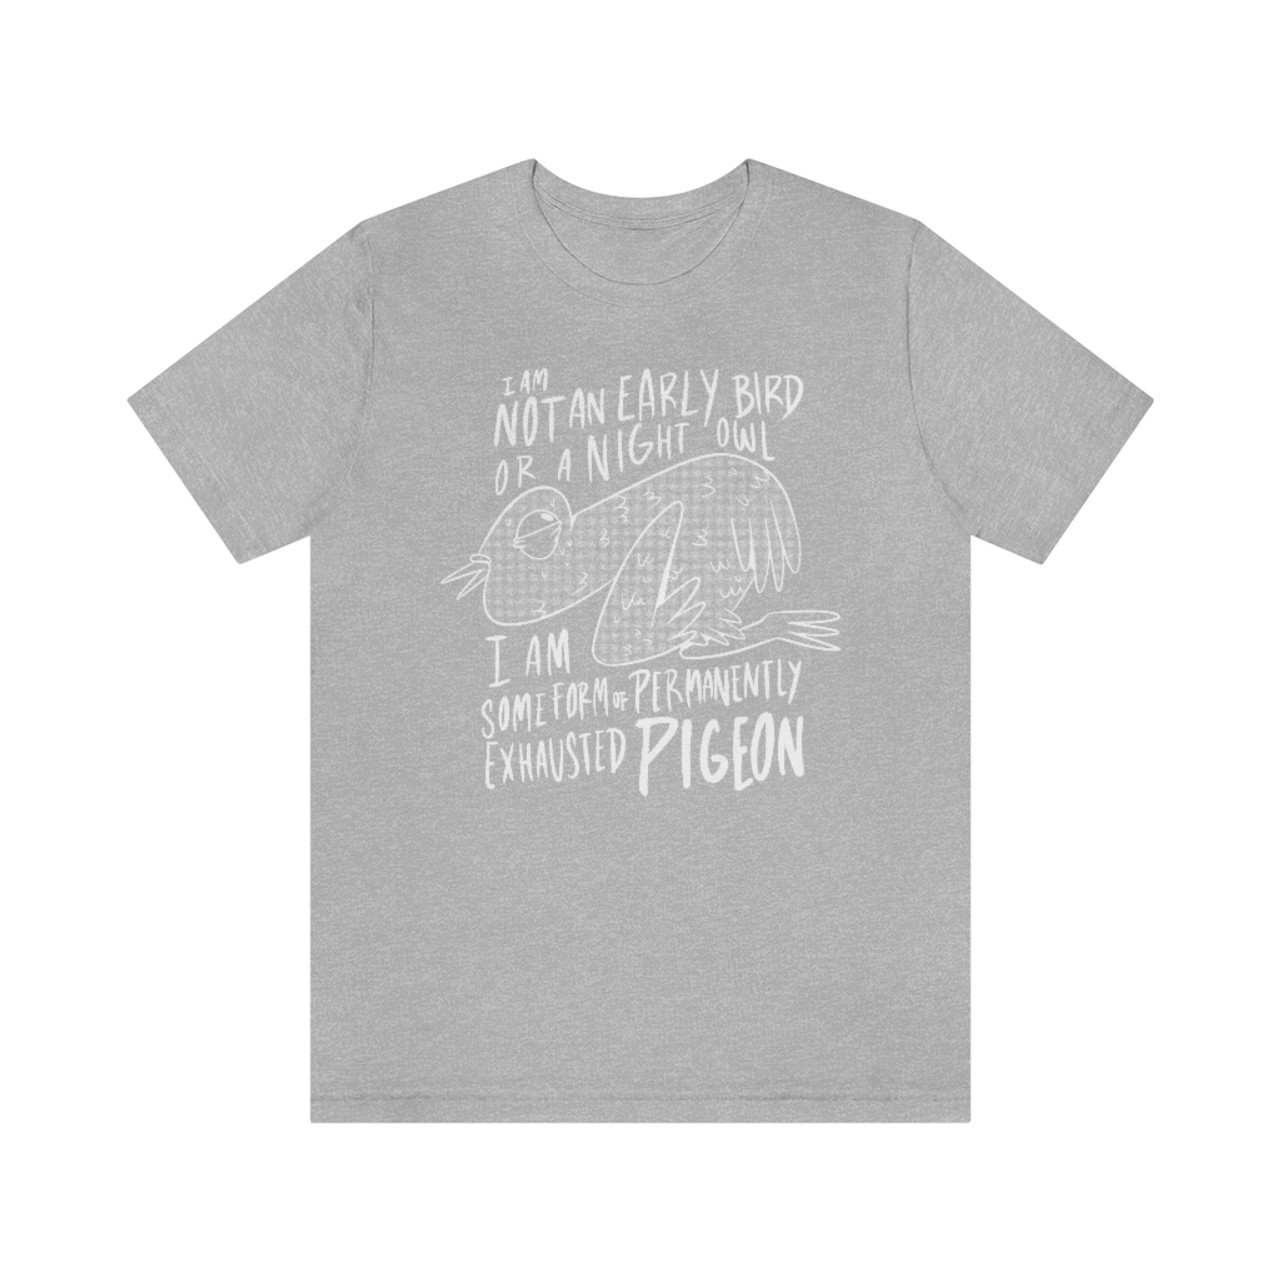 "Exhausted Pigeon" Crew Neck T-shirt